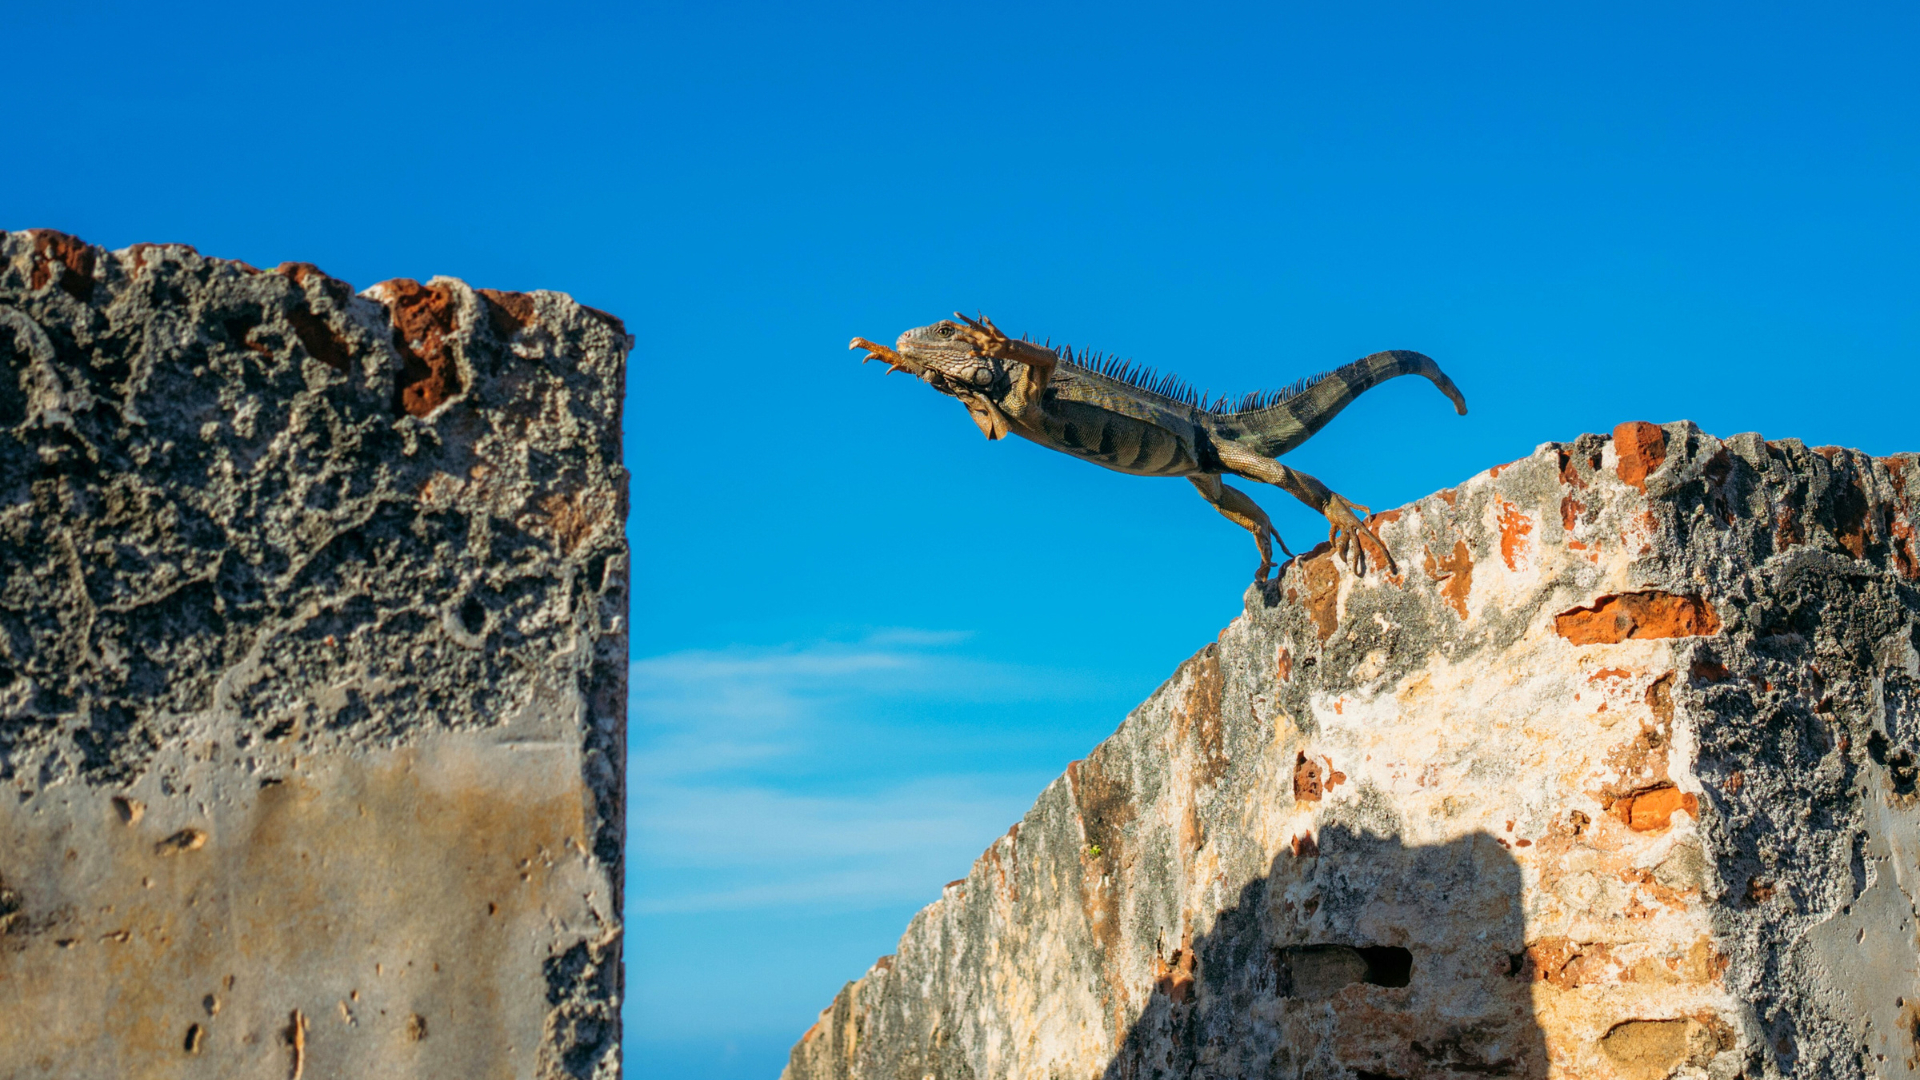 Photo of an iguana leaping between two brick walls against a blue sky